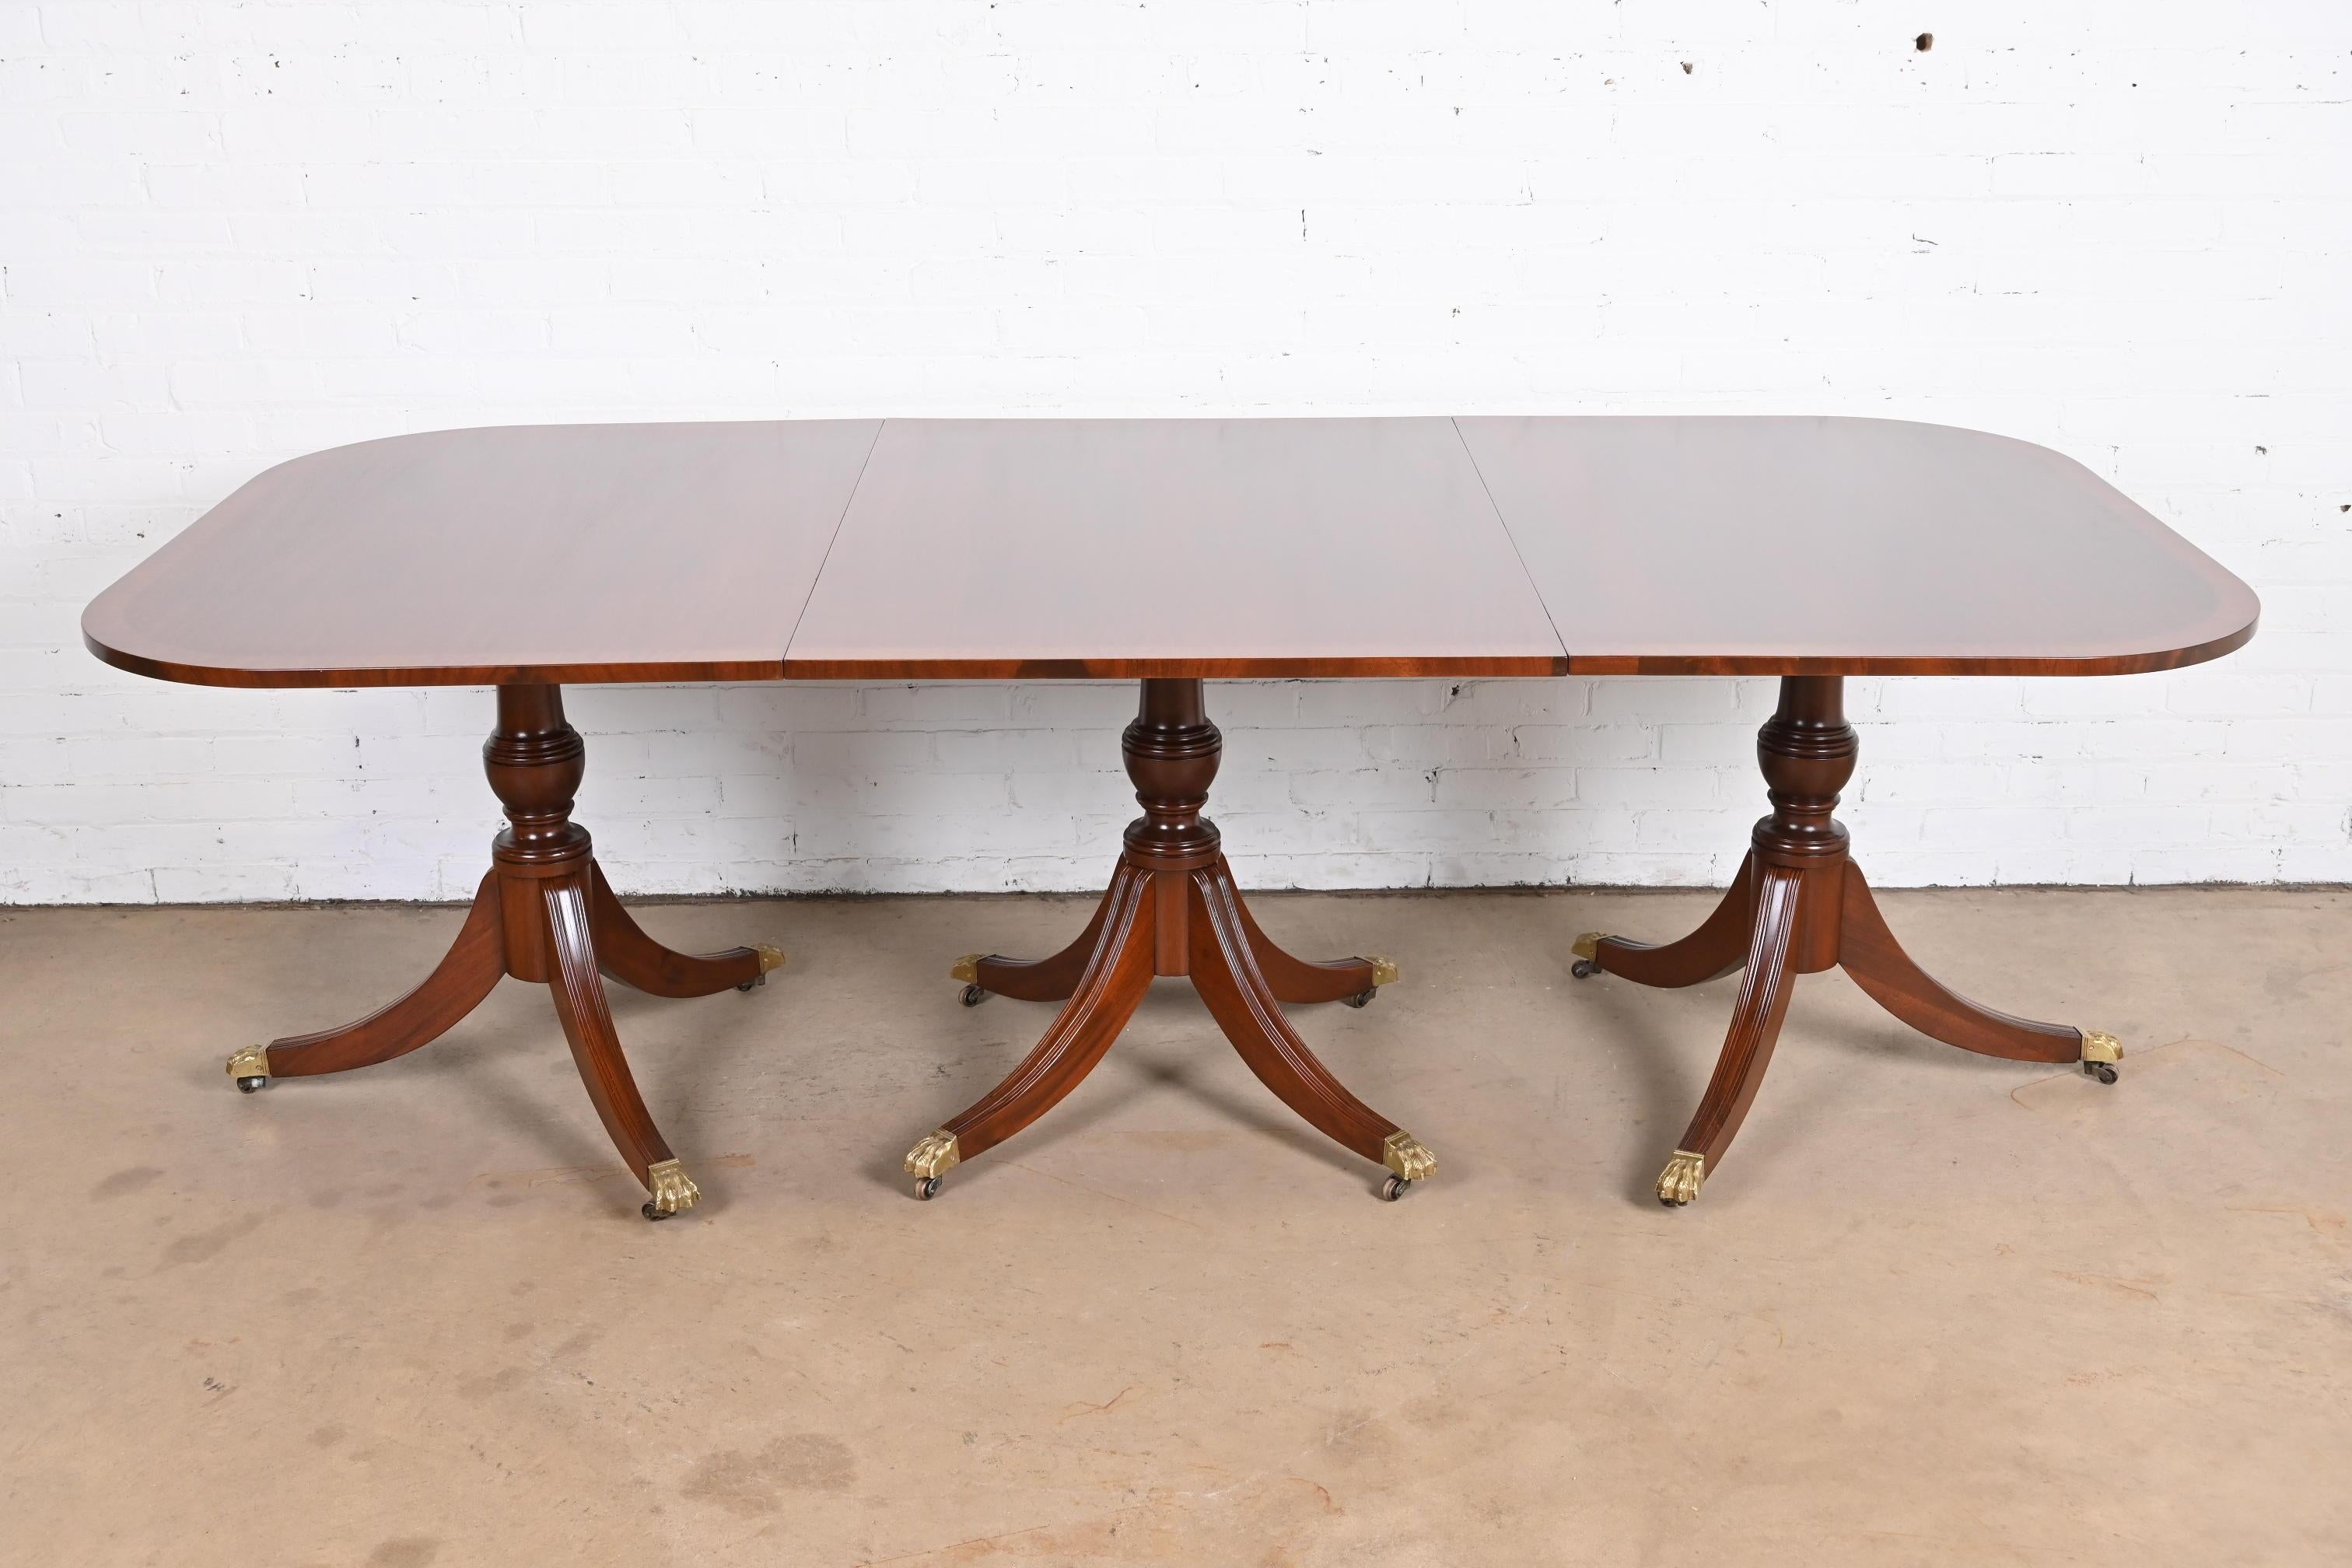 An exceptional Georgian or Regency style extension triple pedestal banquet or dining table.

In the manner of Baker Furniture.

USA, circa mid-20th century.

Mahogany, with satinwood banding, carved solid mahogany pedestals, and brass paw feet